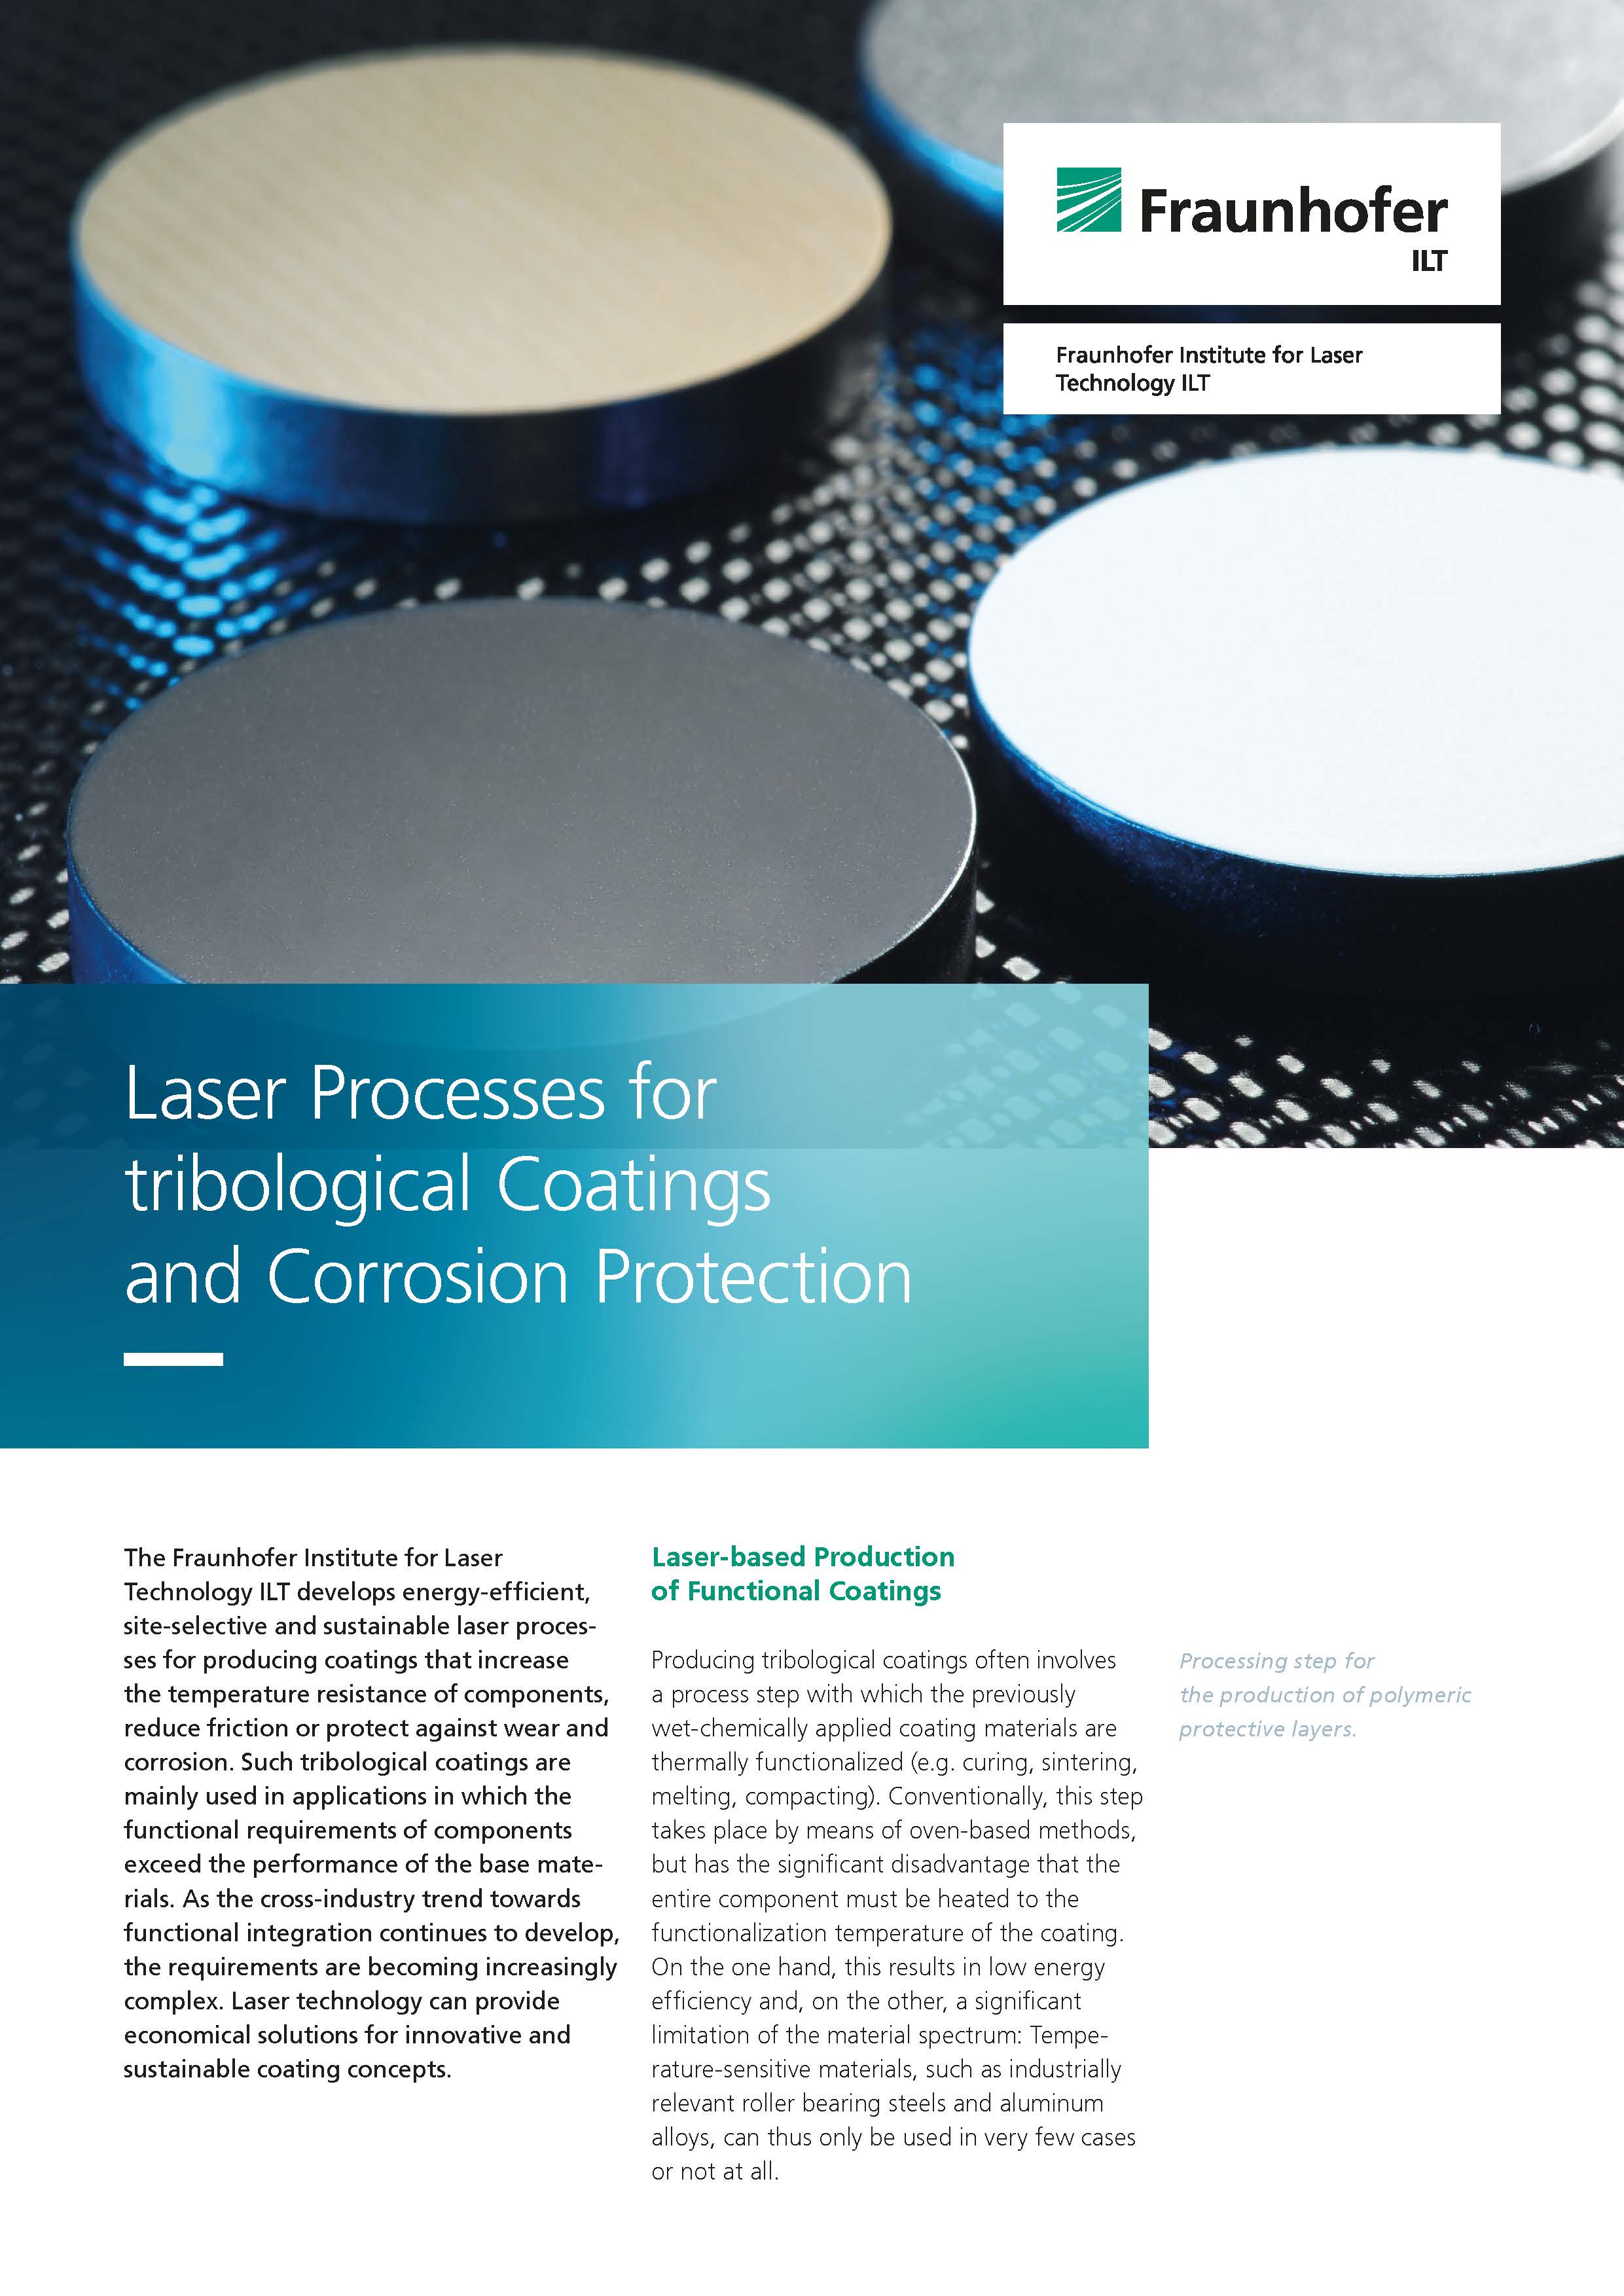 Brochure Laser Processes for Tribological Coatings and Corrosion Protection